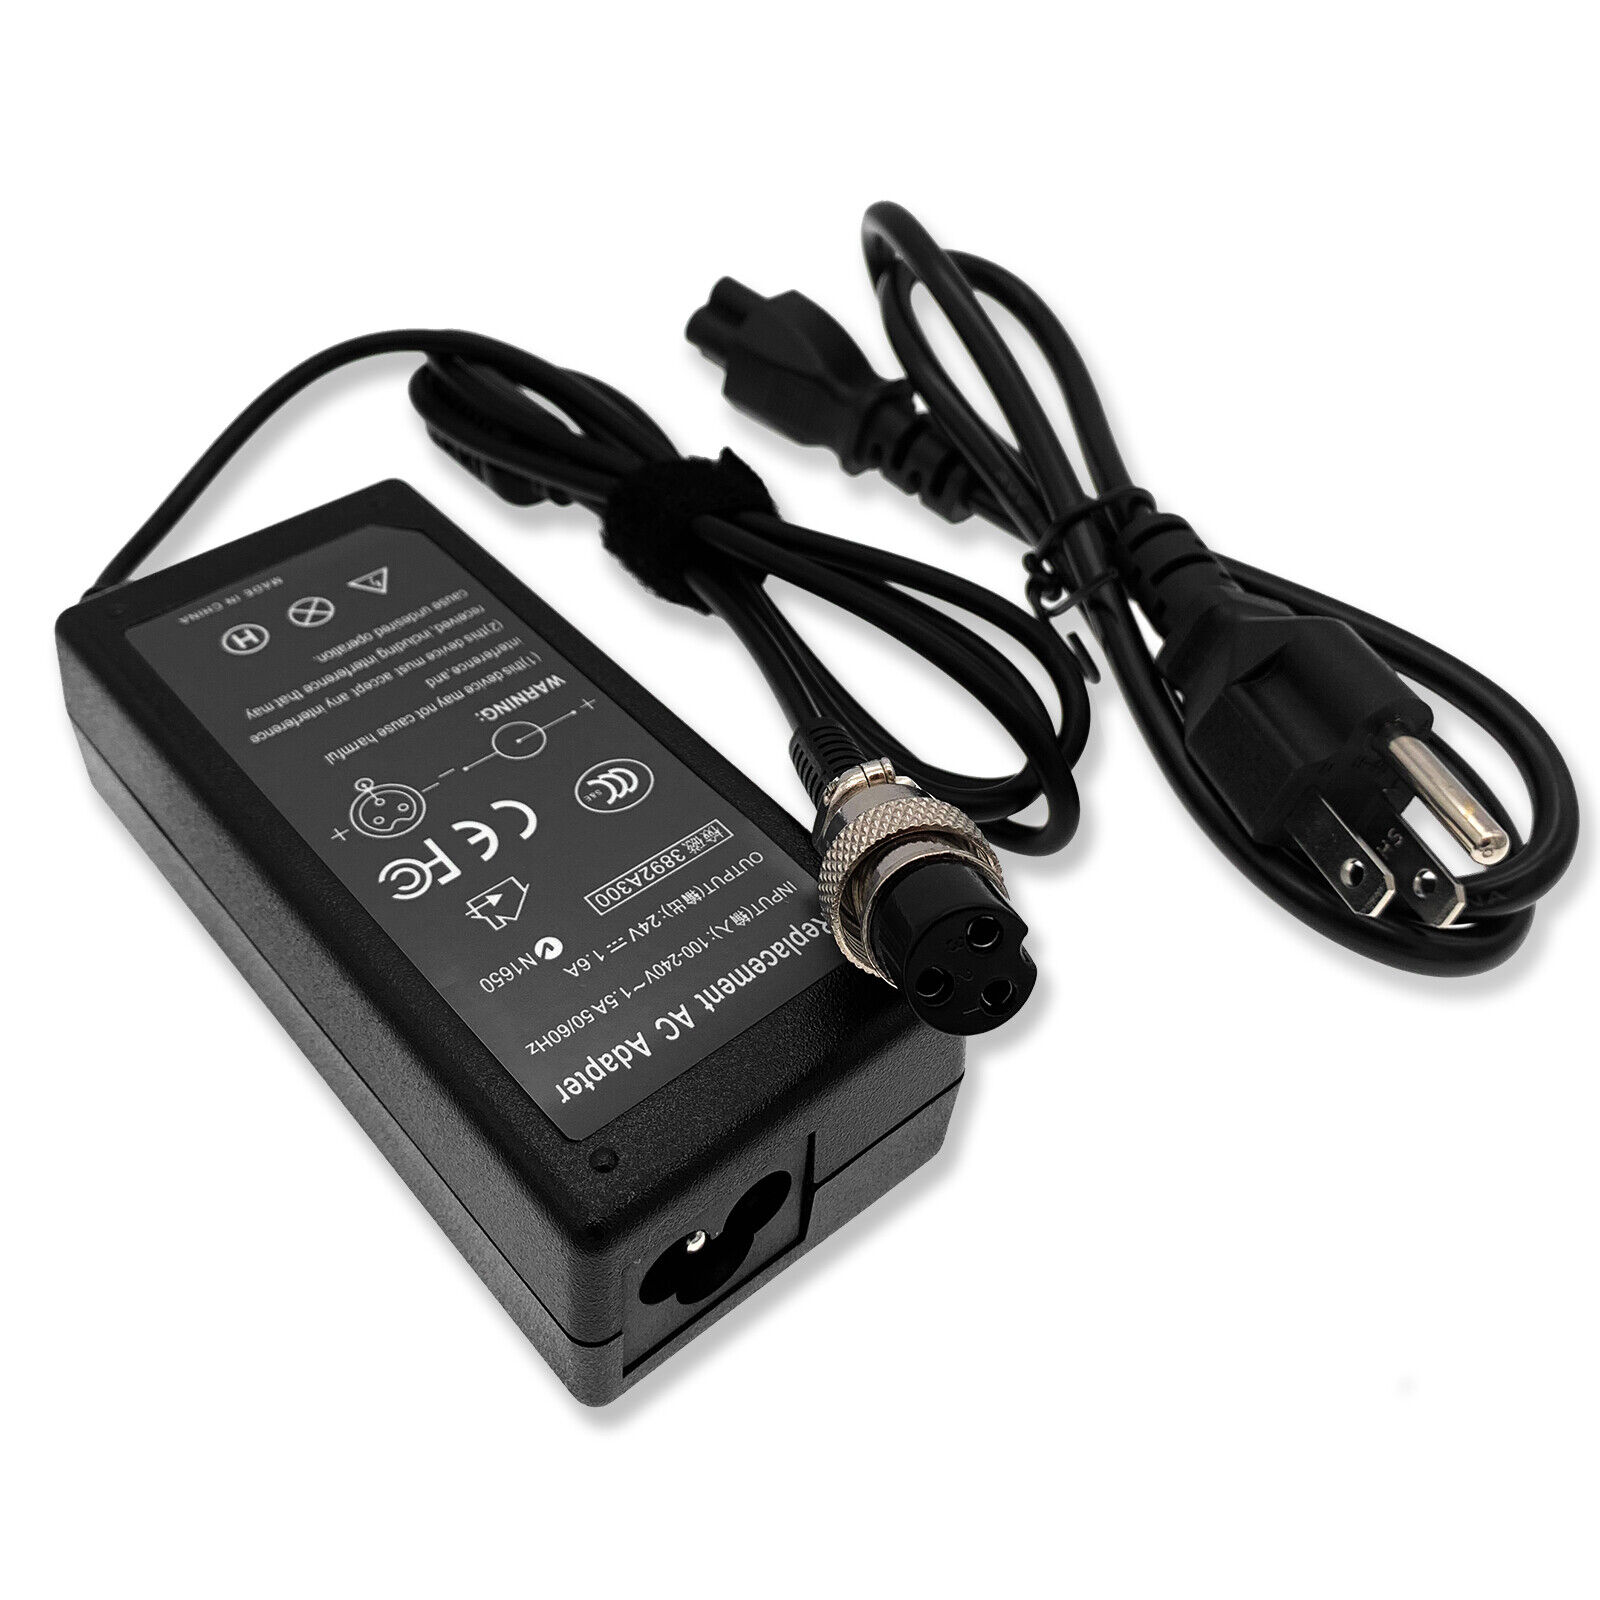 New Scooter Bike Battery Charger for Razor MX350 Electric Dirt Rocket